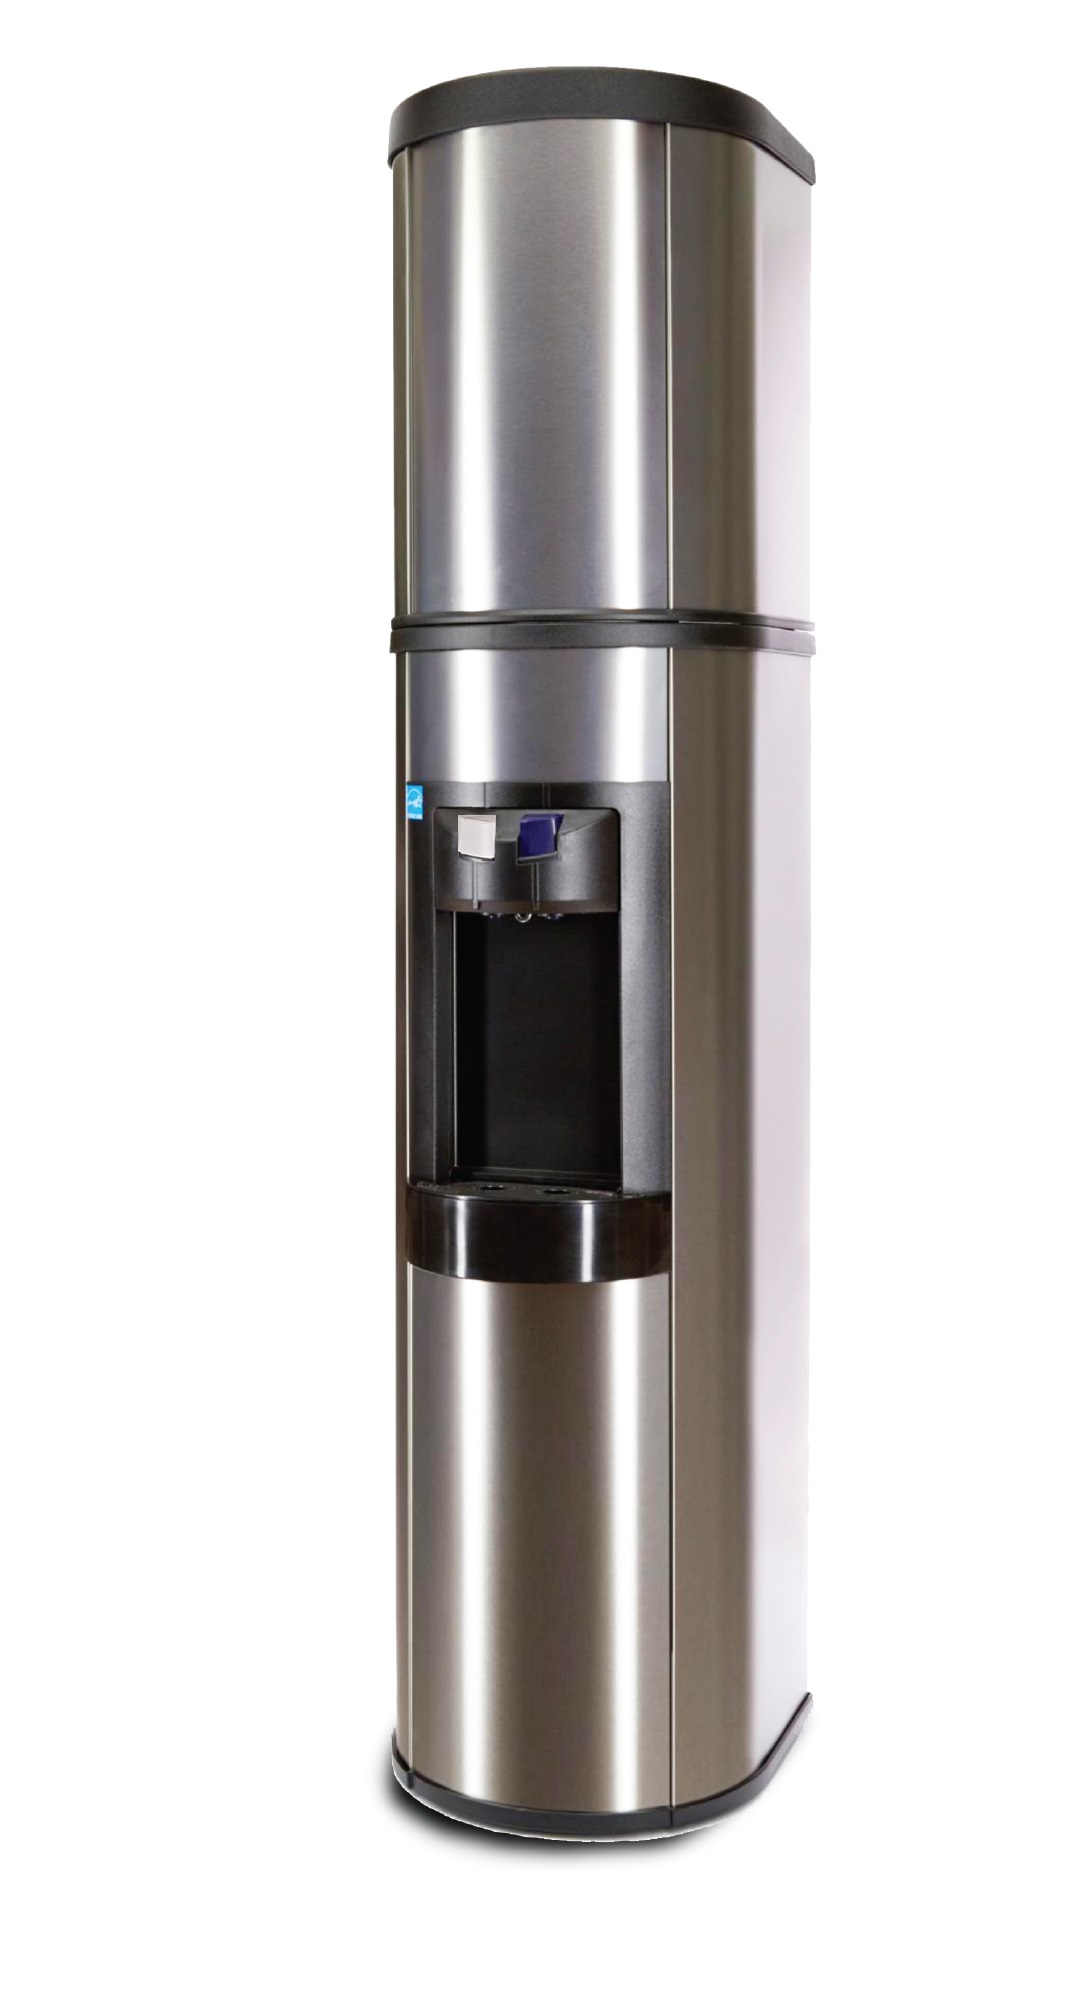 Absolu Water Cooler - Stainless Steel with Black Trim - Our Latest Innovation! Room Temp & Cold